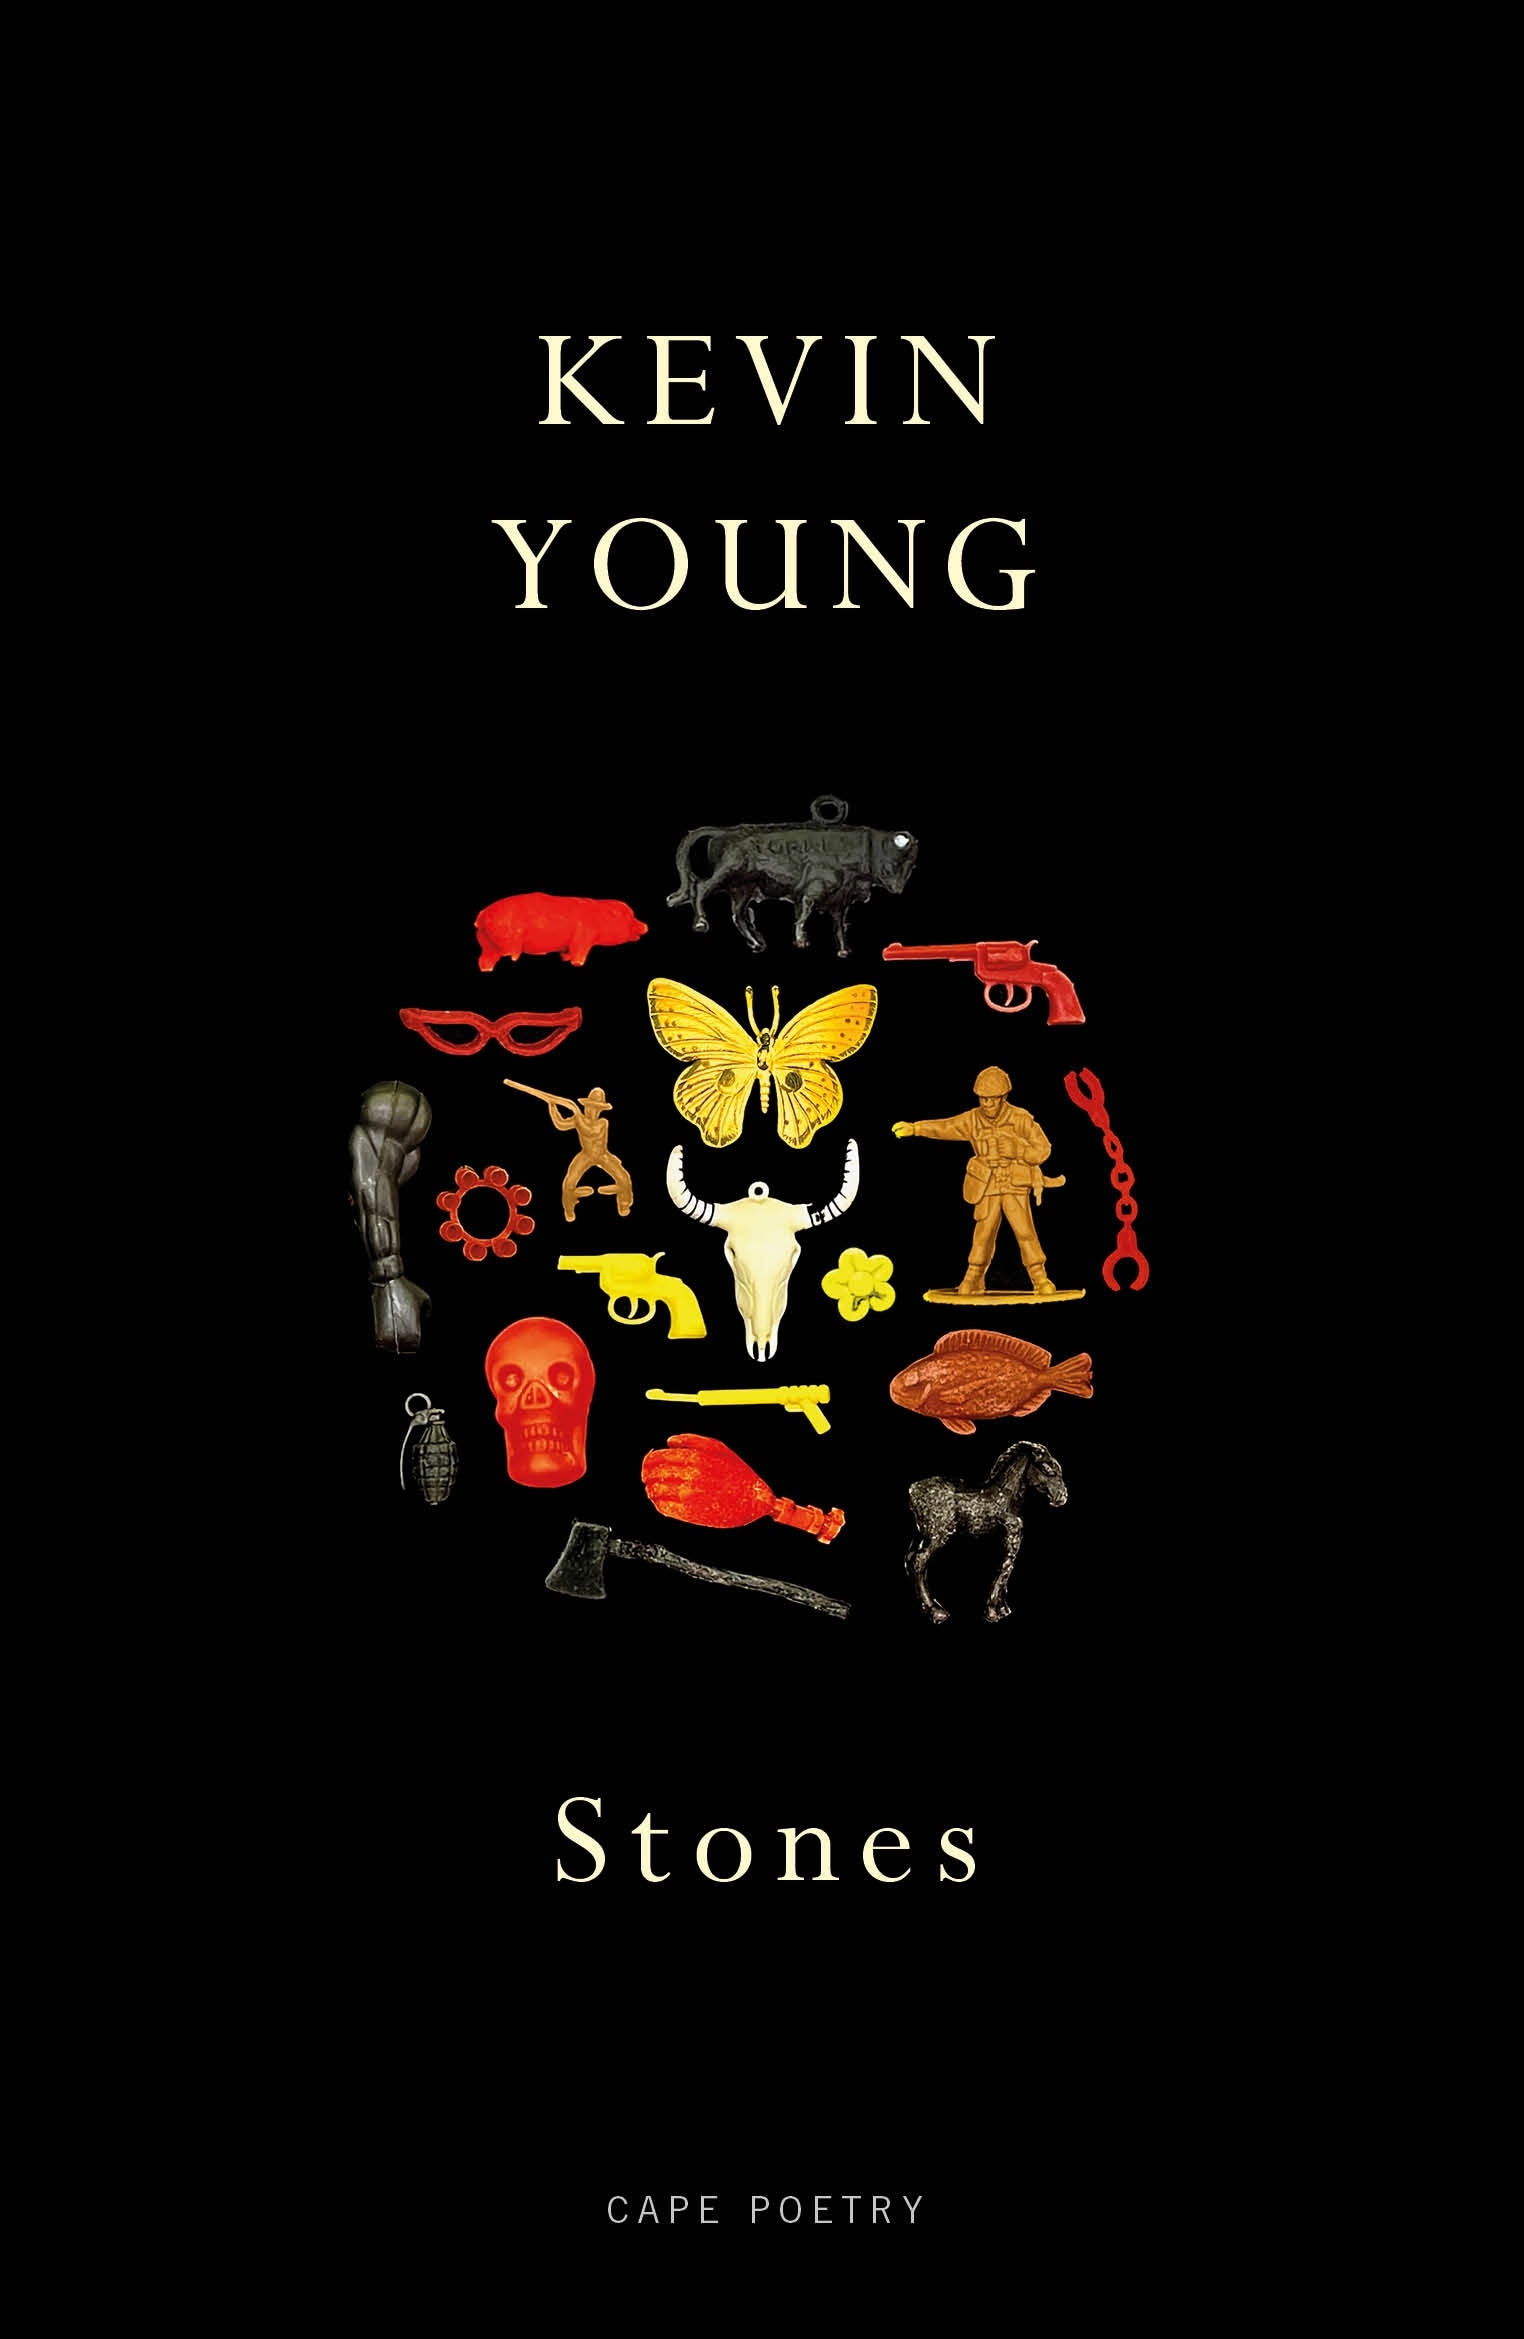 Book “Stones” by Kevin Young — November 18, 2021